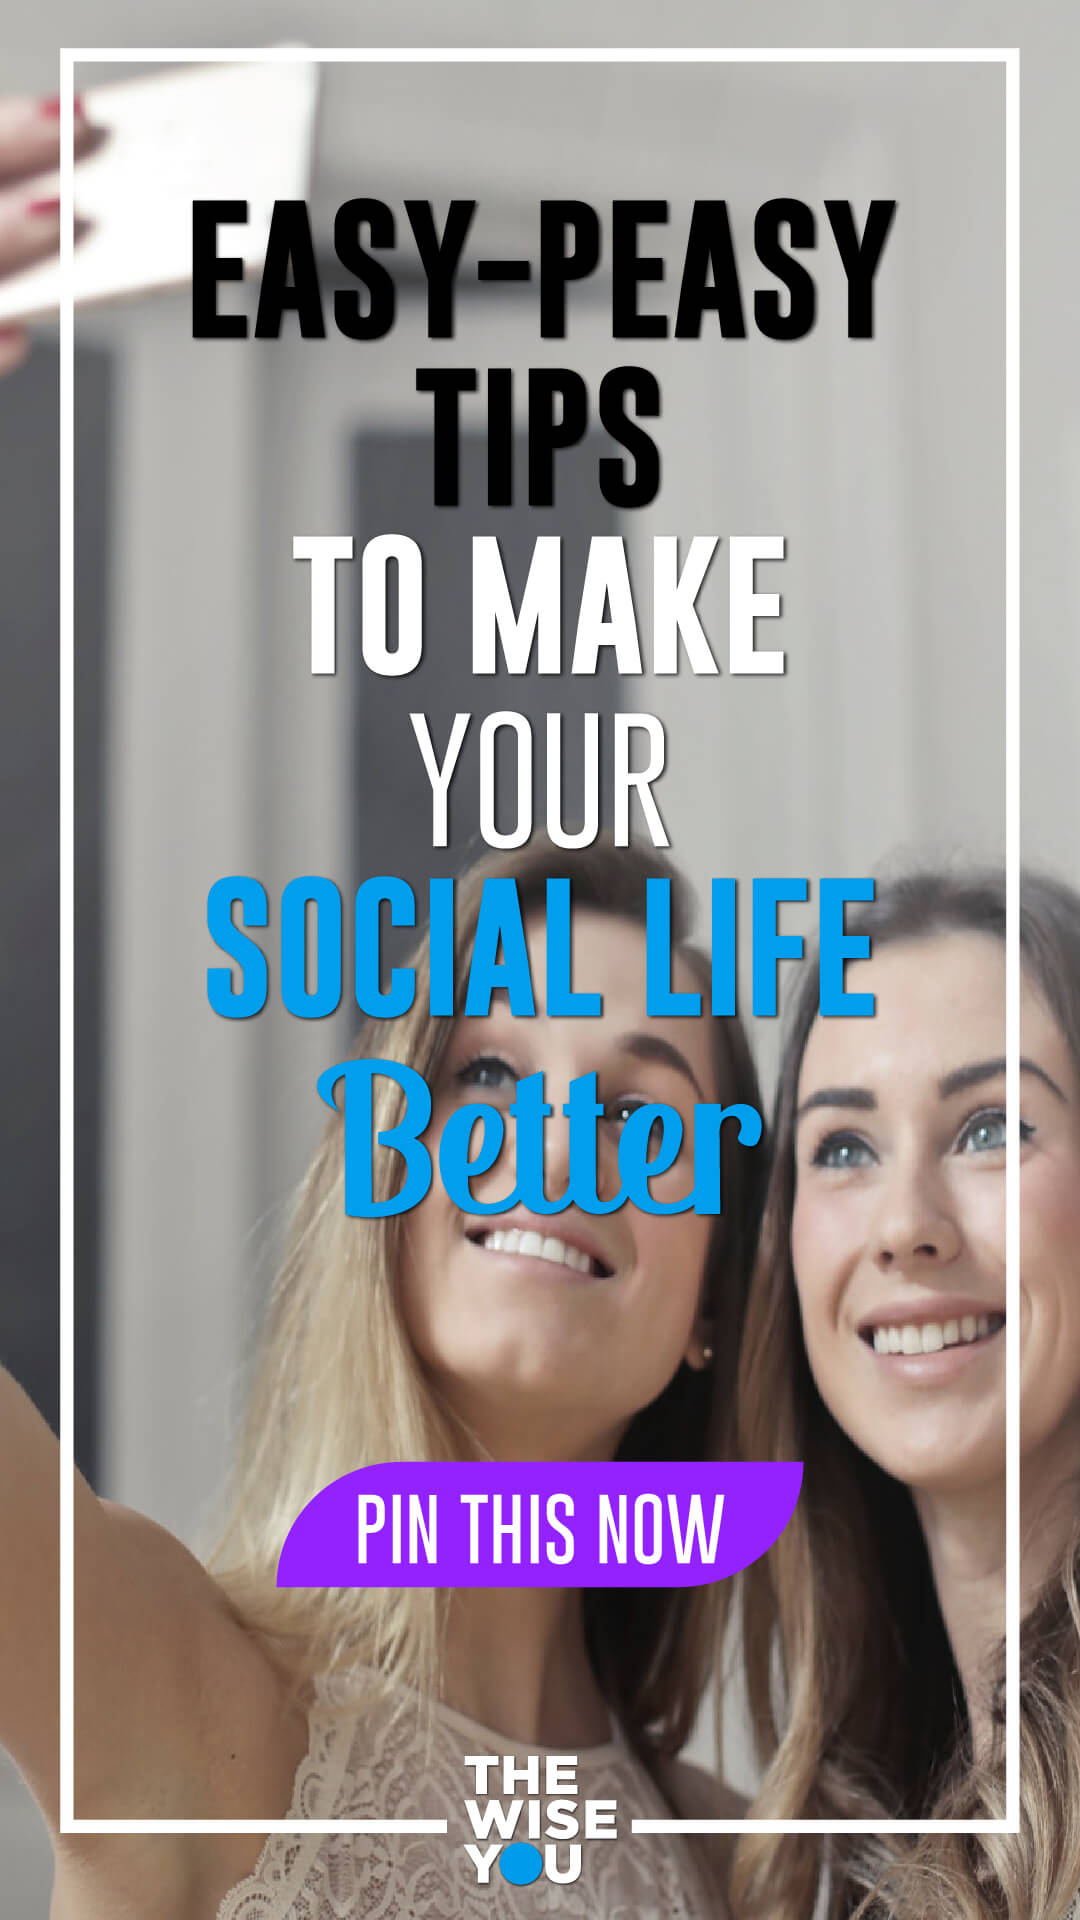 Easy-Peasy Tips To Make Your Social Life Better